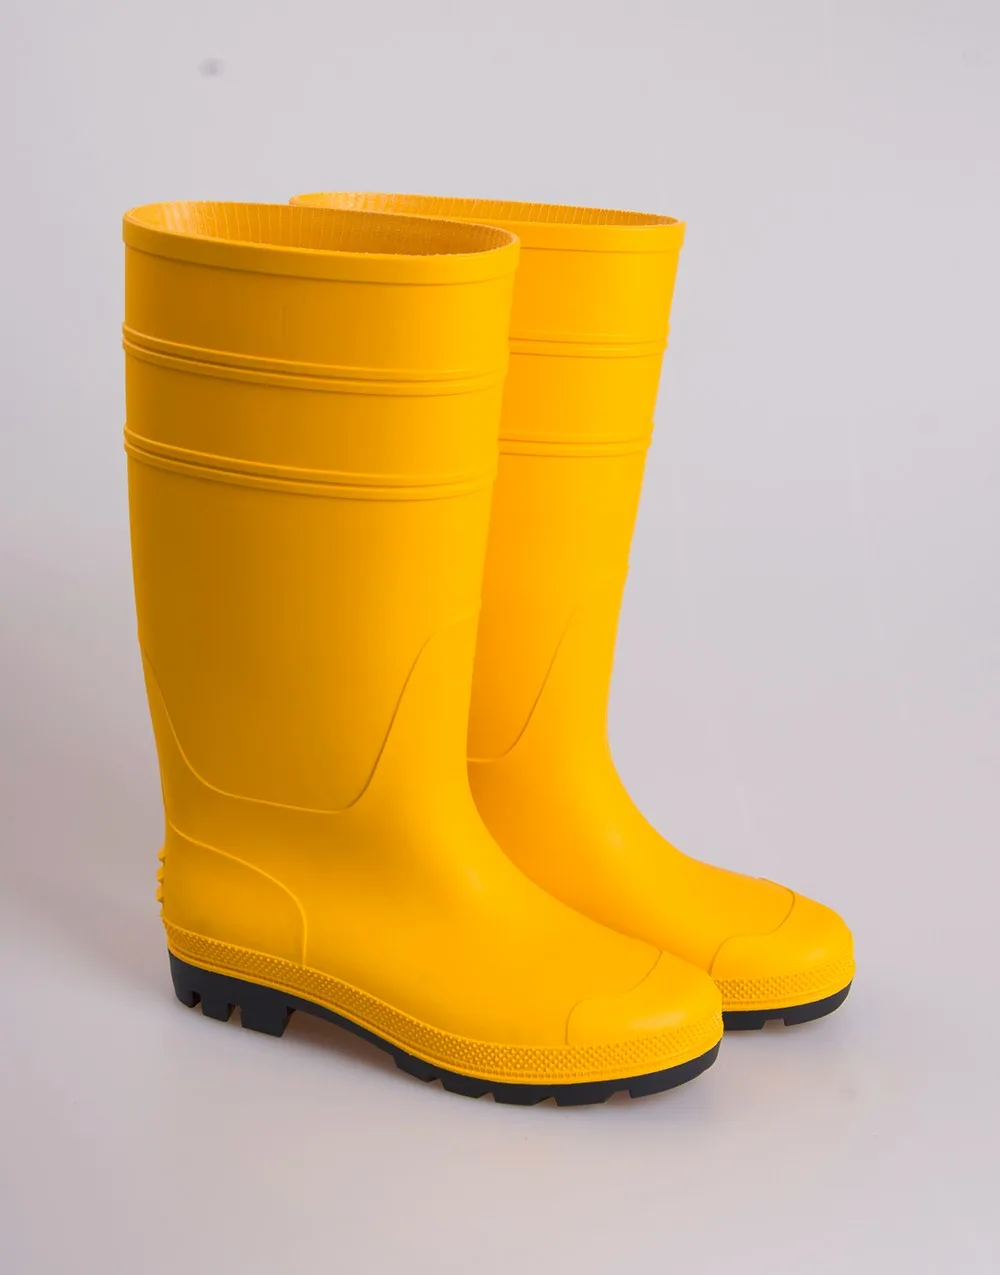 Water-proof Pvc Tall Gum Boots,Safety Plastic Boots For Rain,Security ...